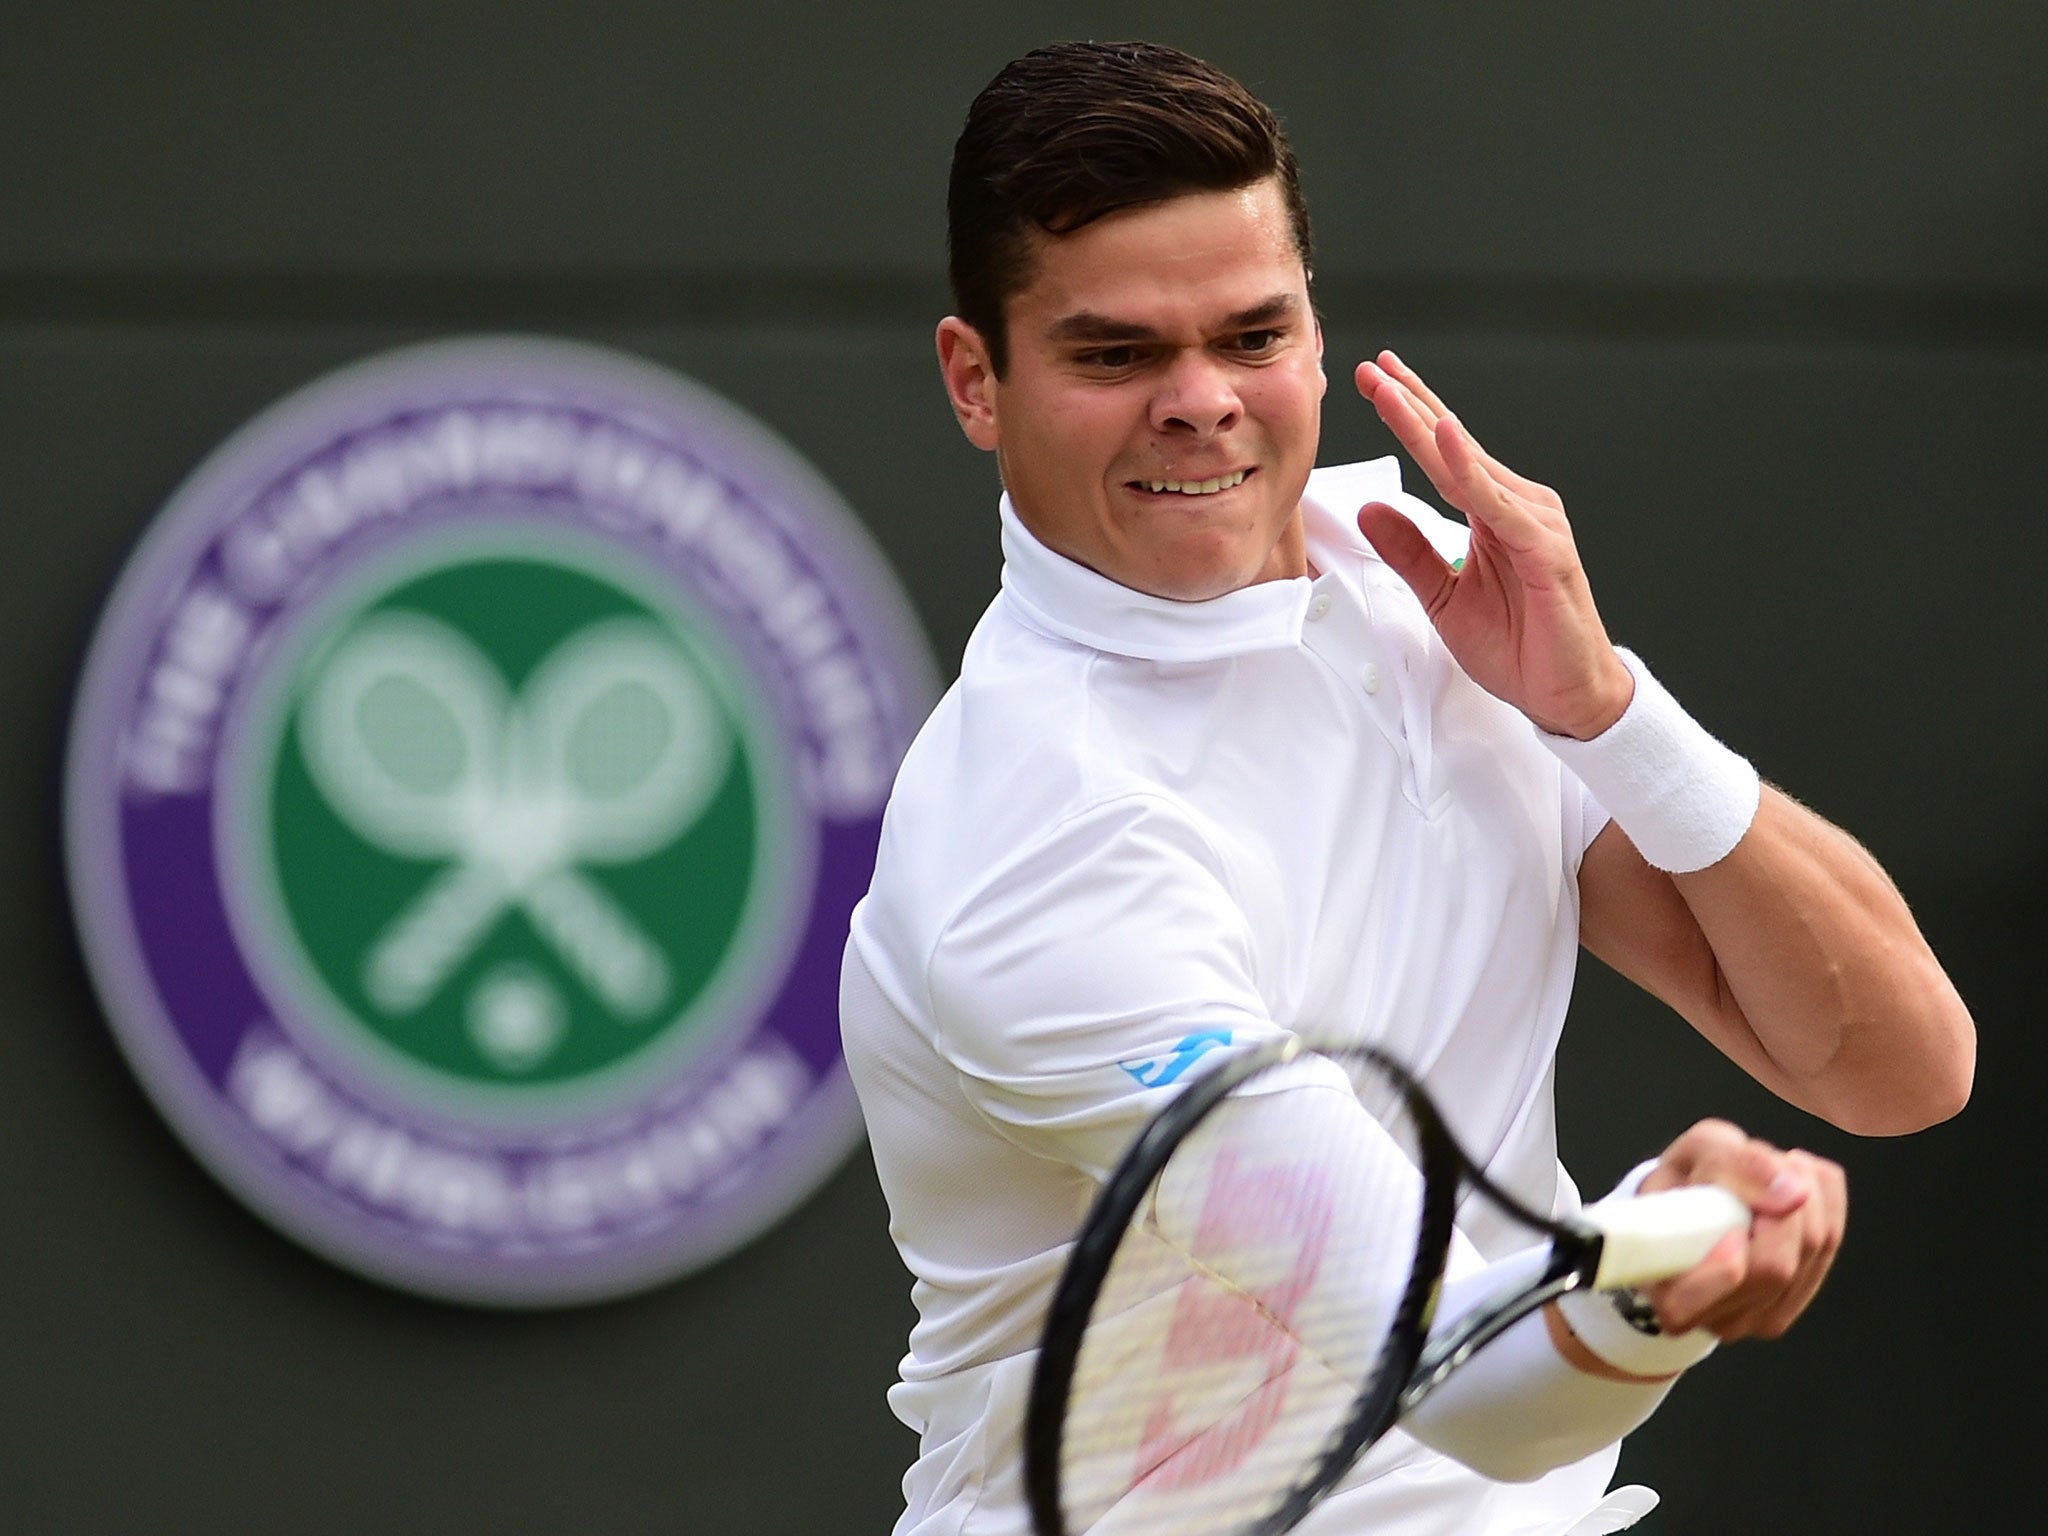 Milos Raonic has never progressed beyond the fourth
round at Wimbledon before and never beaten Federer